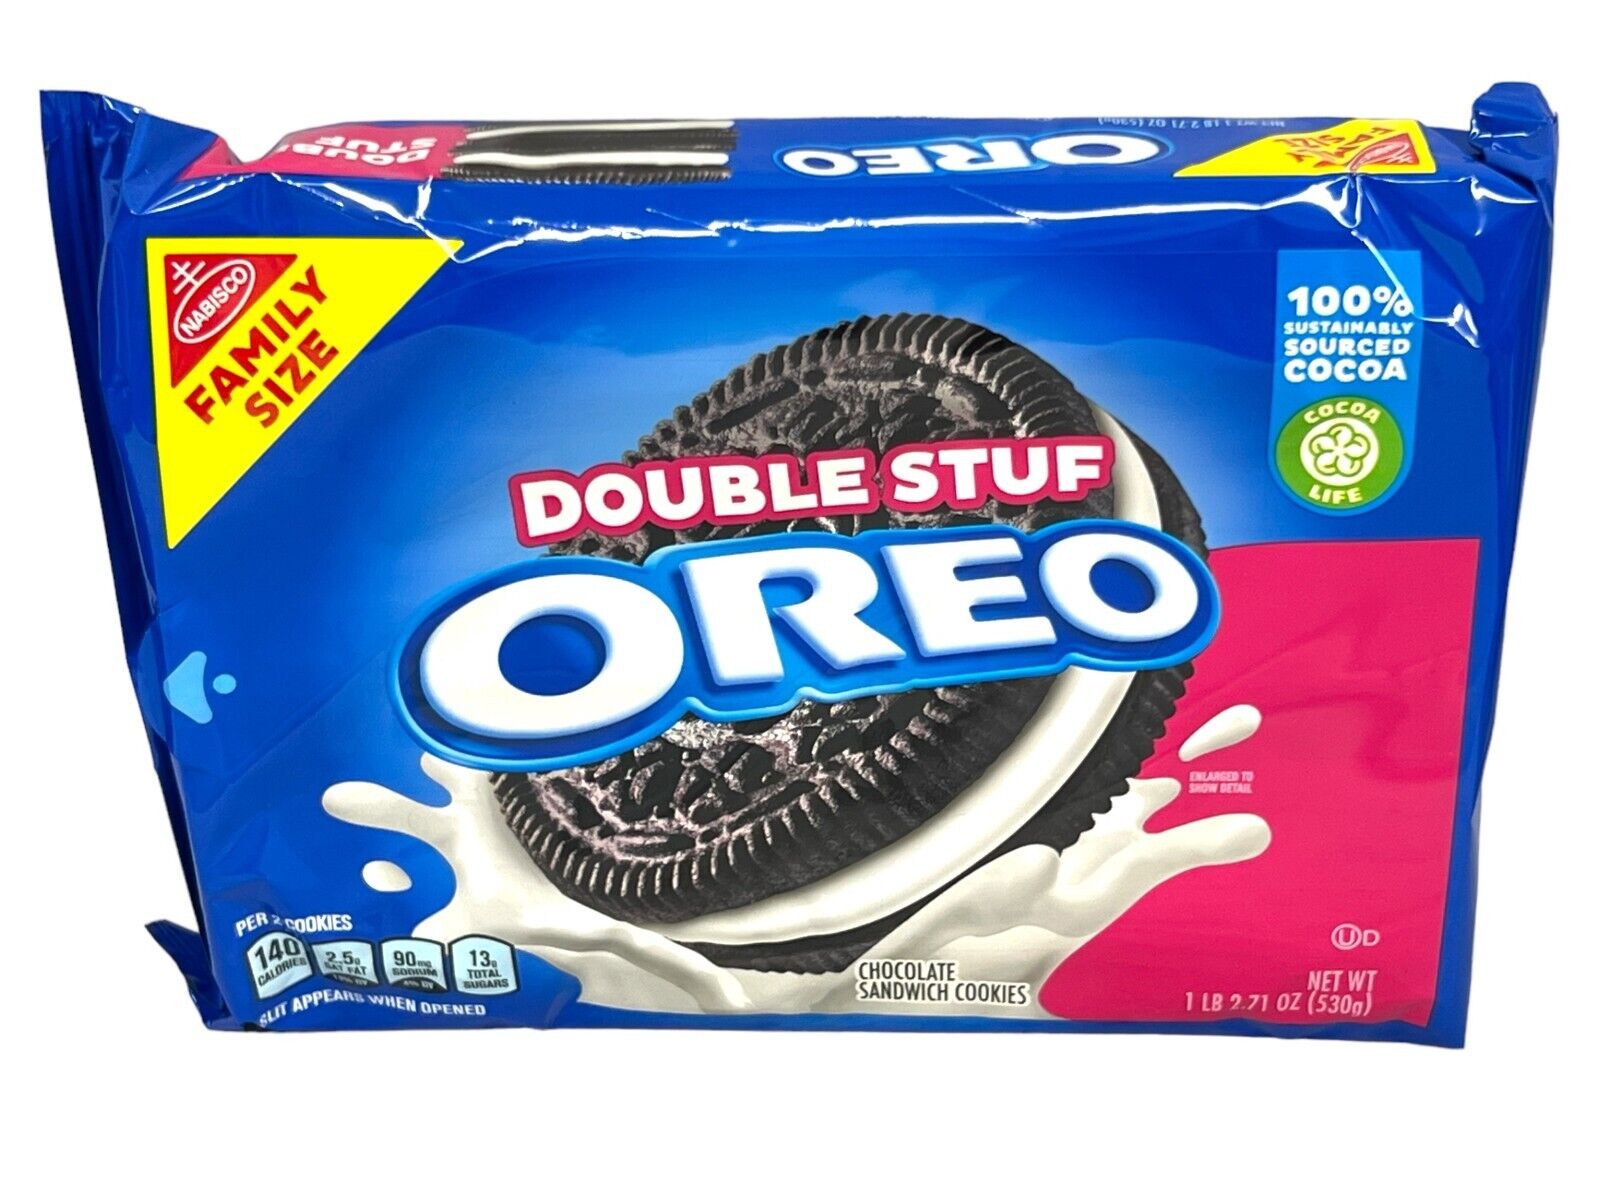 15 Double Stuffed Oreos Nutrition Facts - Facts.net